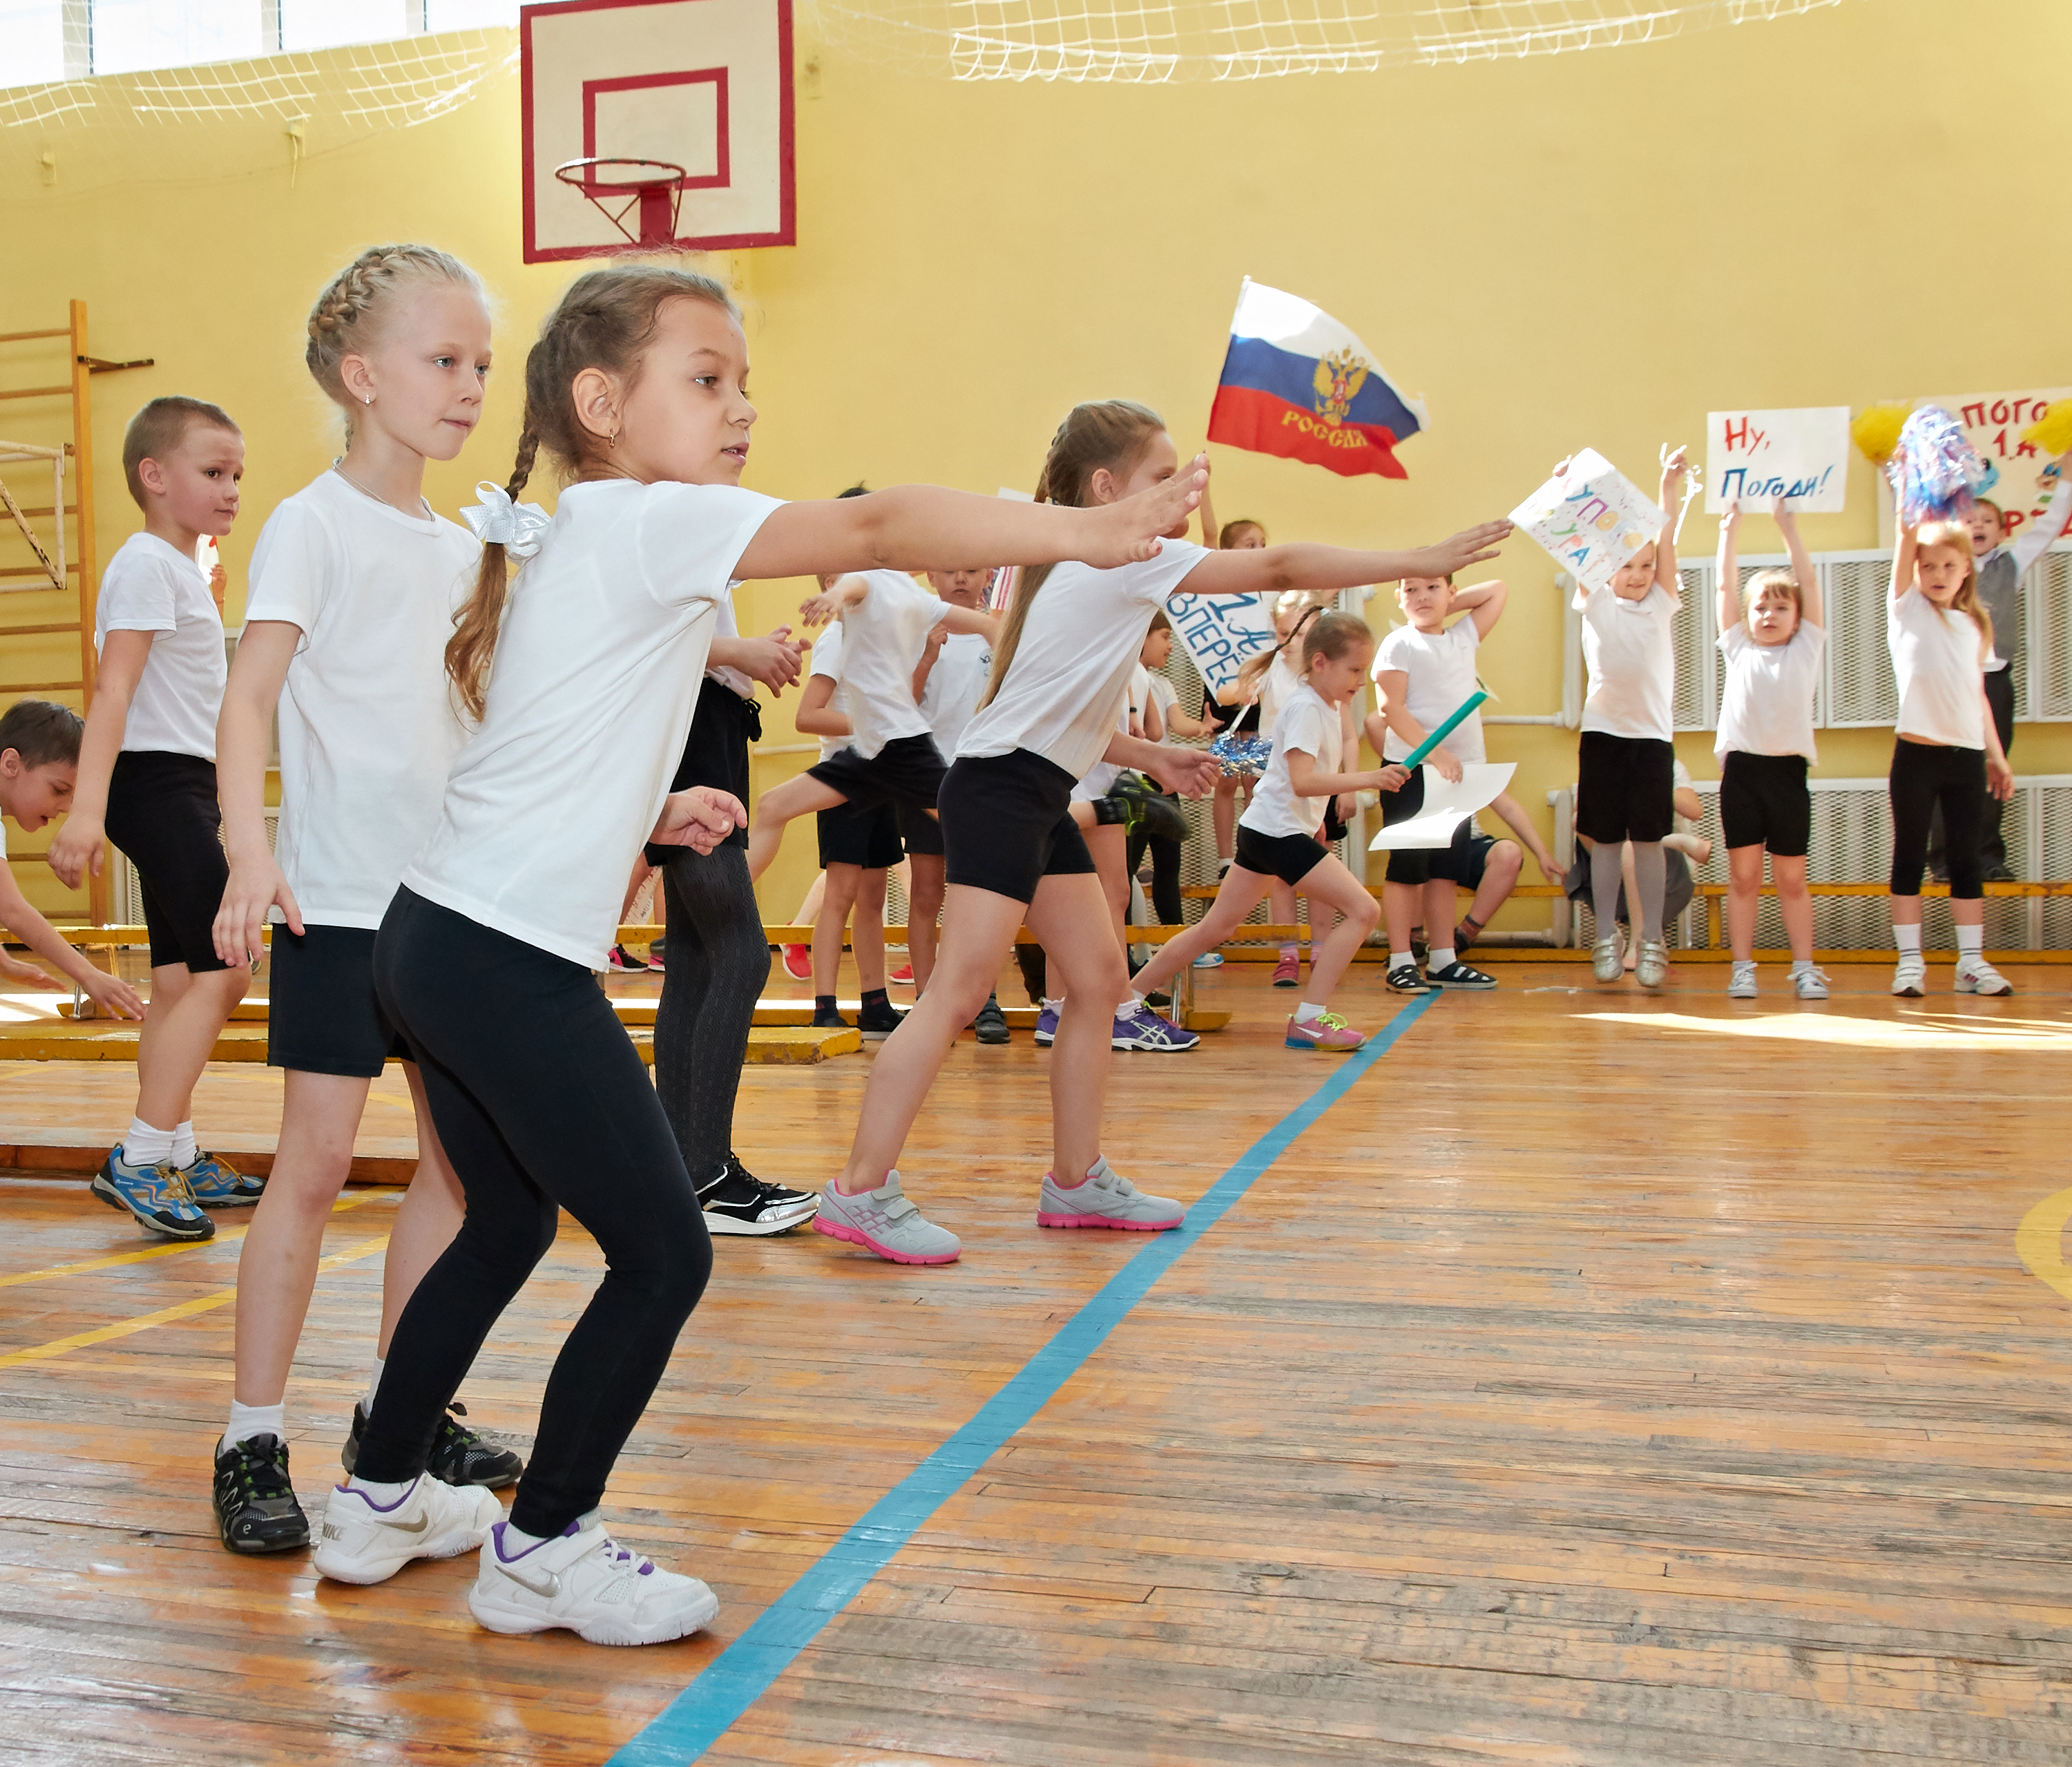 School sport competitions